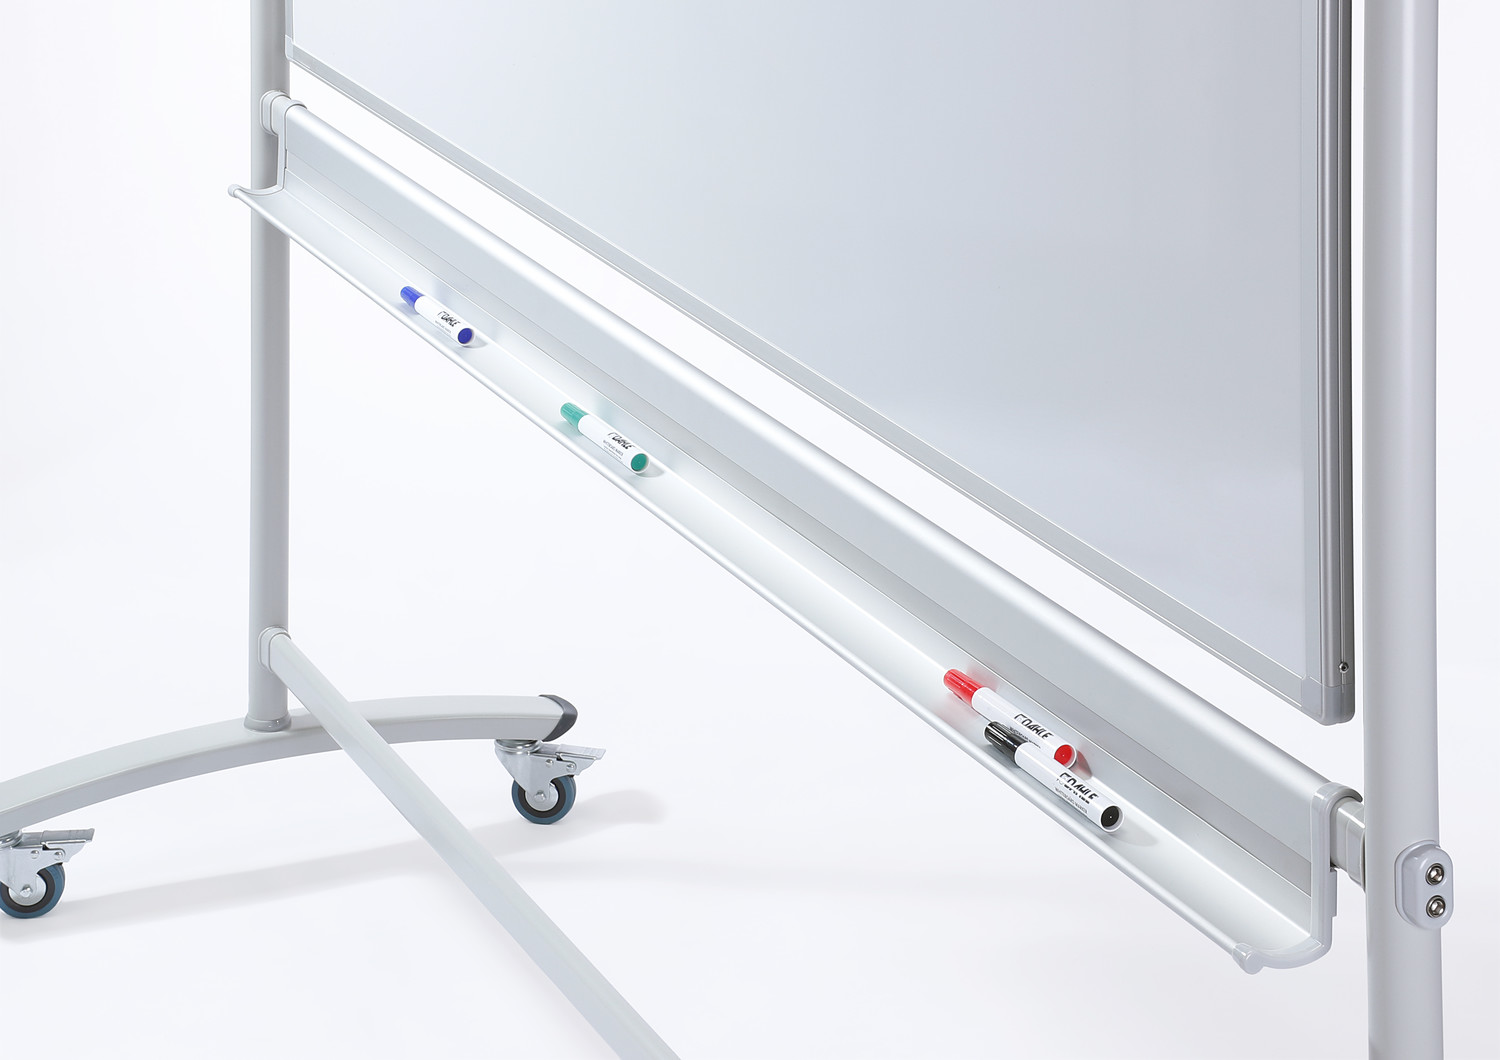 Extra-long storage tray to ensure whiteboard markers and other utensils are always within easy reach